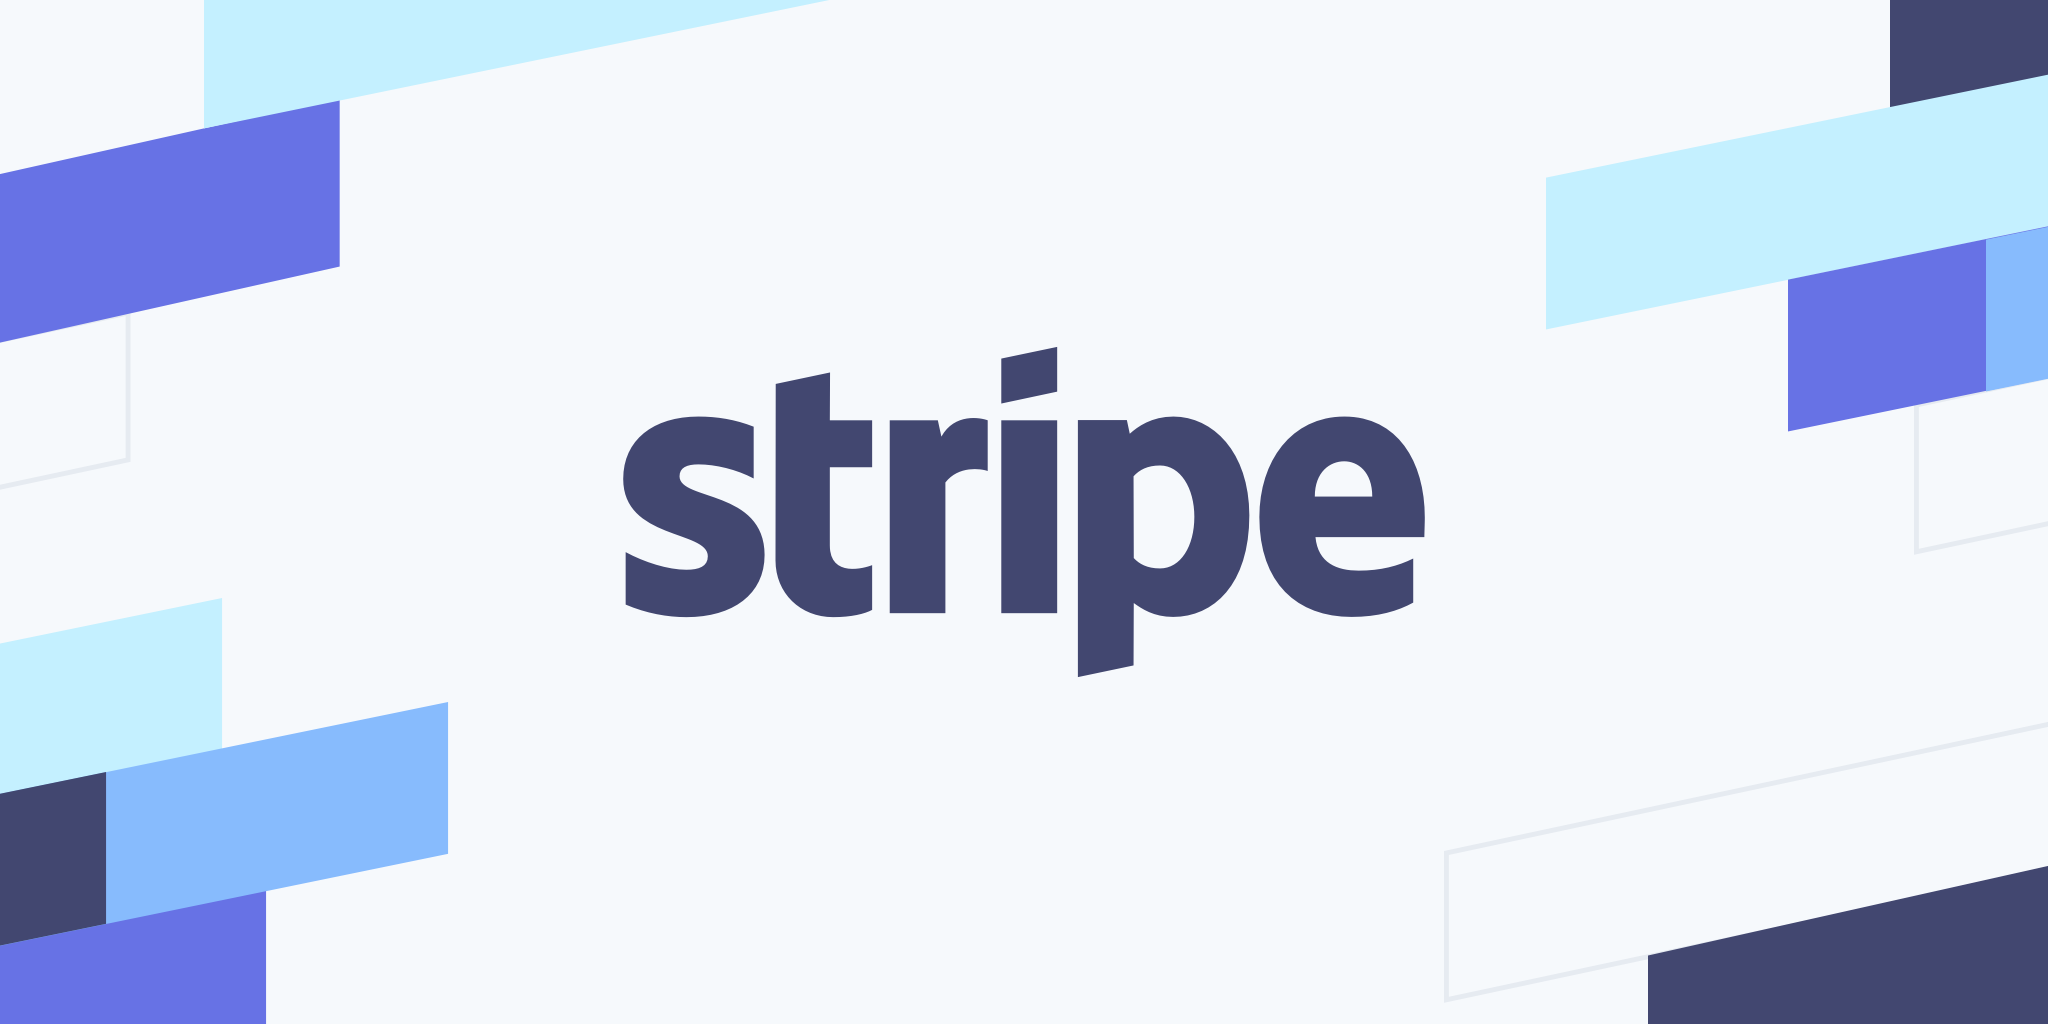 Payment Giant Stripe To Start New Crypto Division